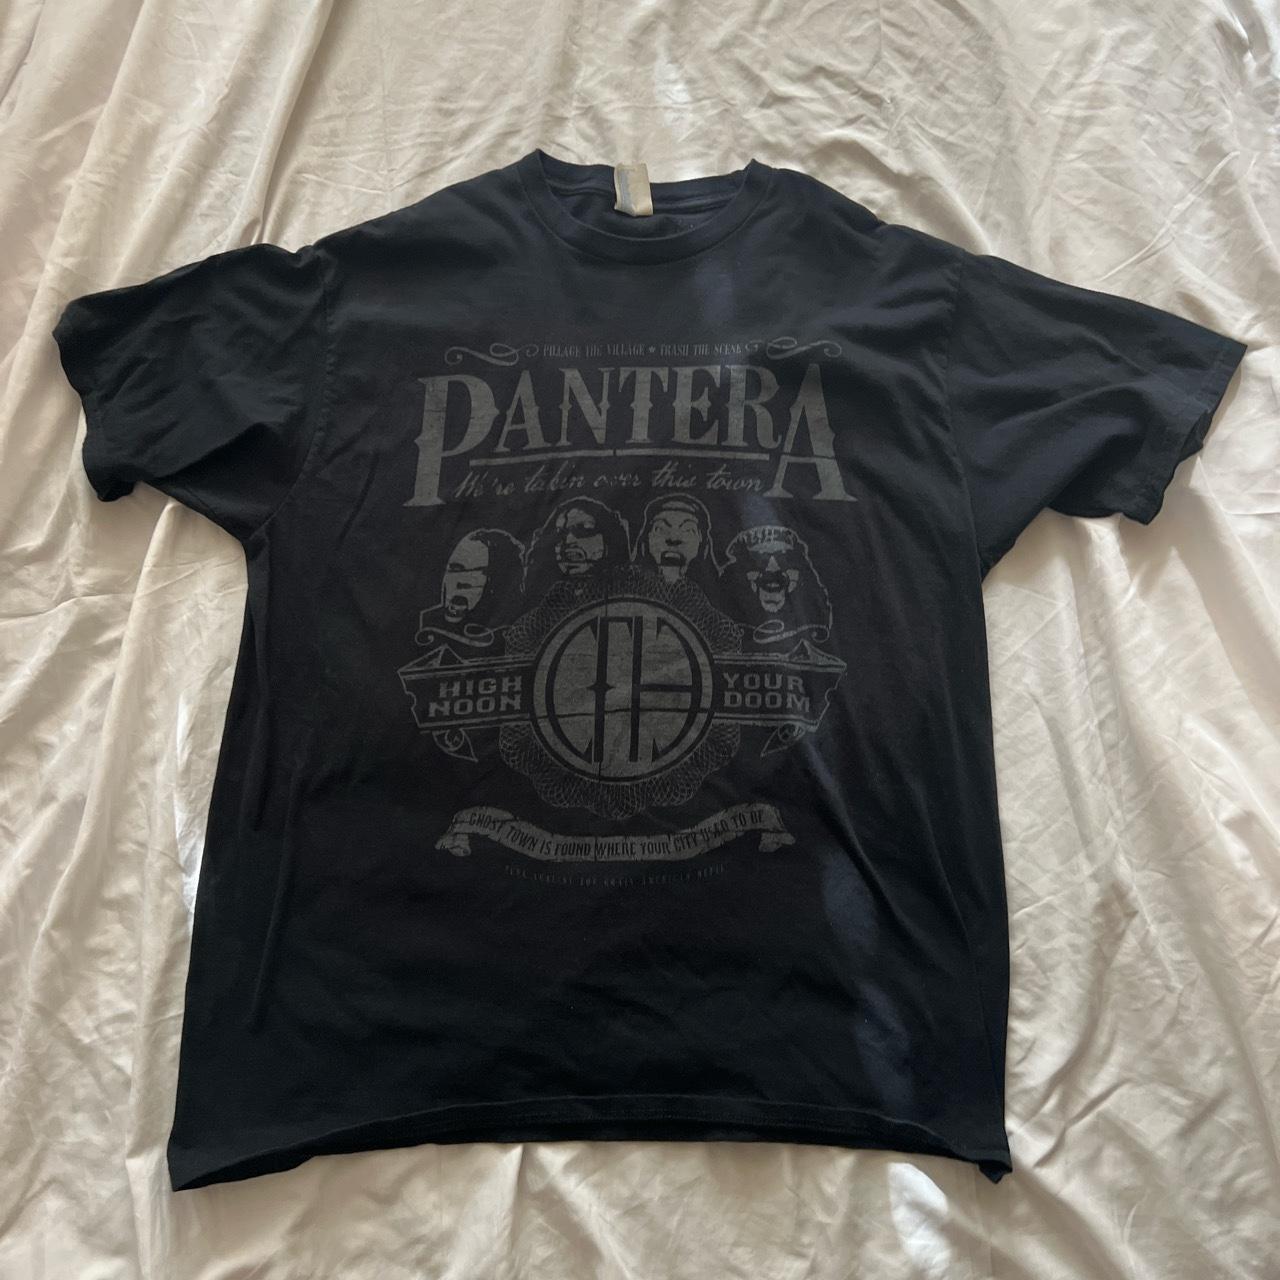 Pantera “high noon your doom” tee XL Hole in tag 29... - Depop